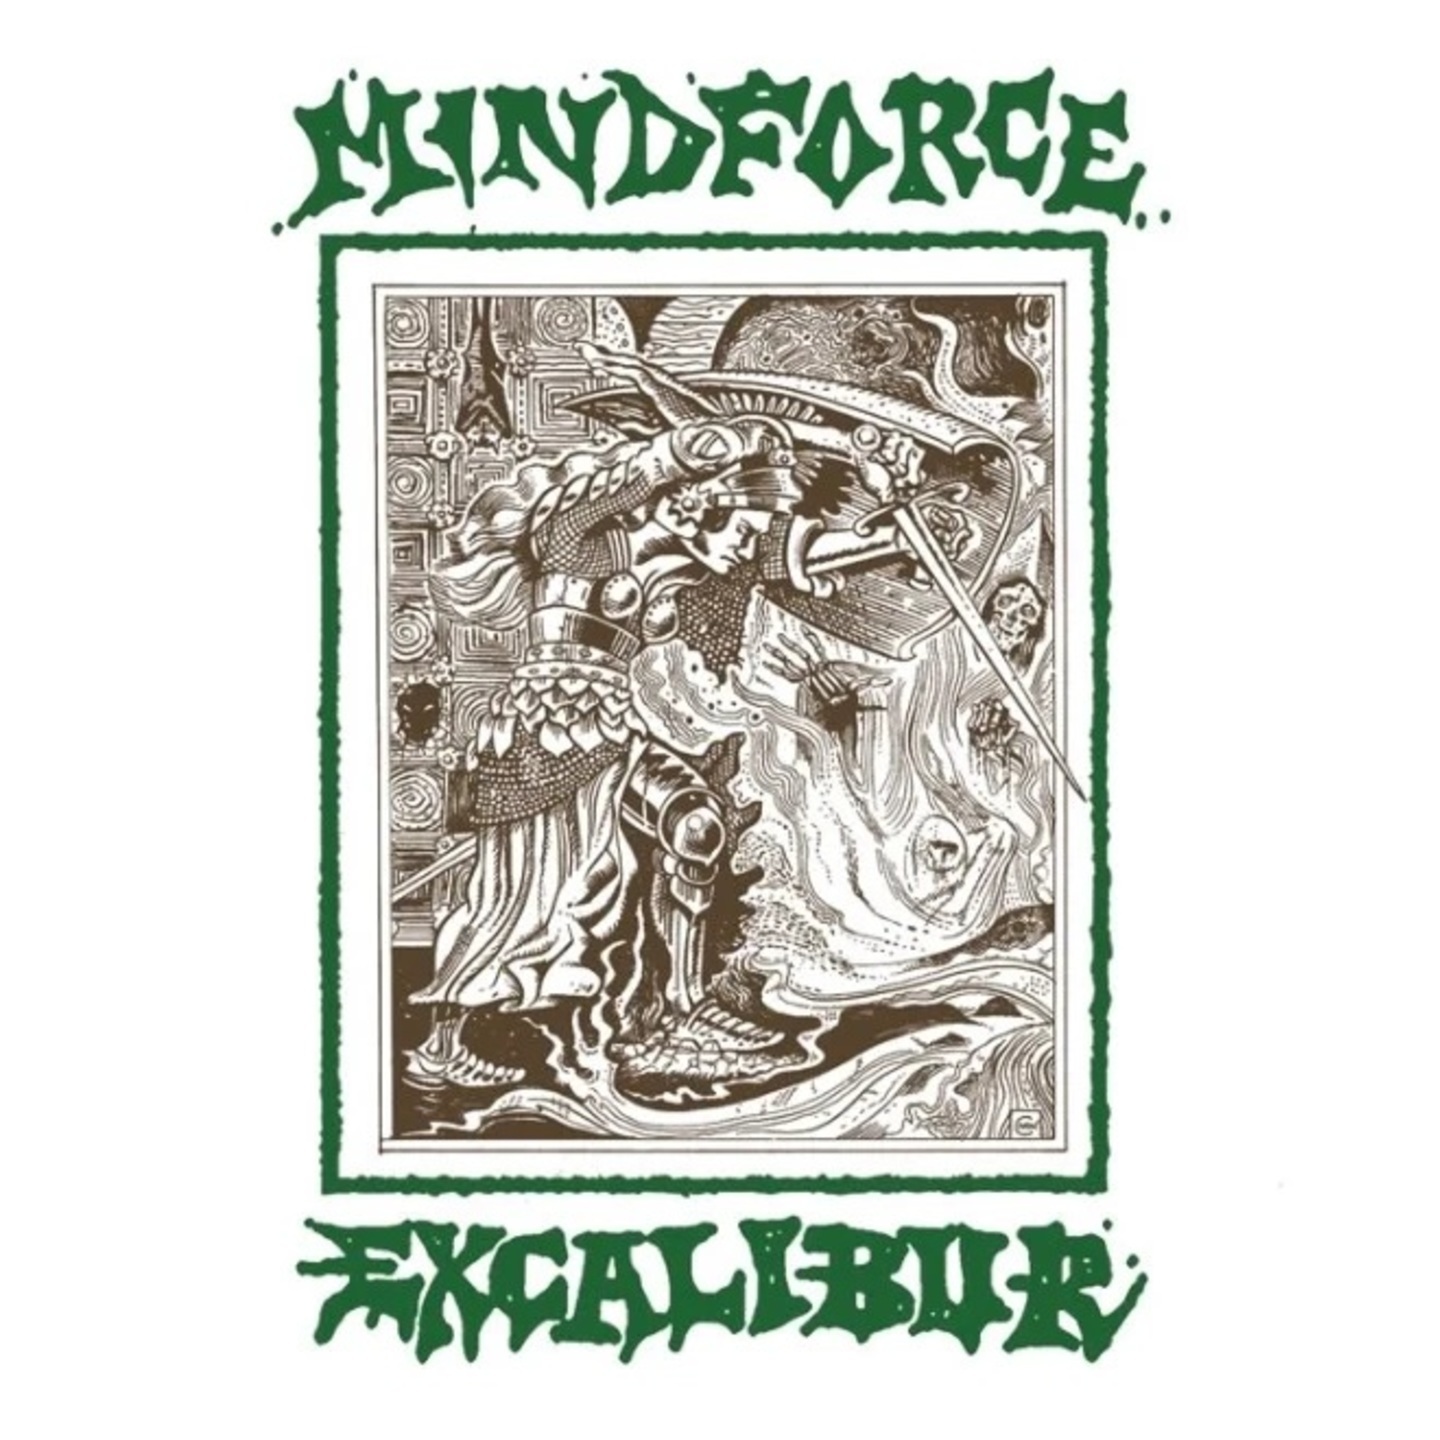 MINDFORCE - Excalibur LP Clear with Green Butterfly vinyl